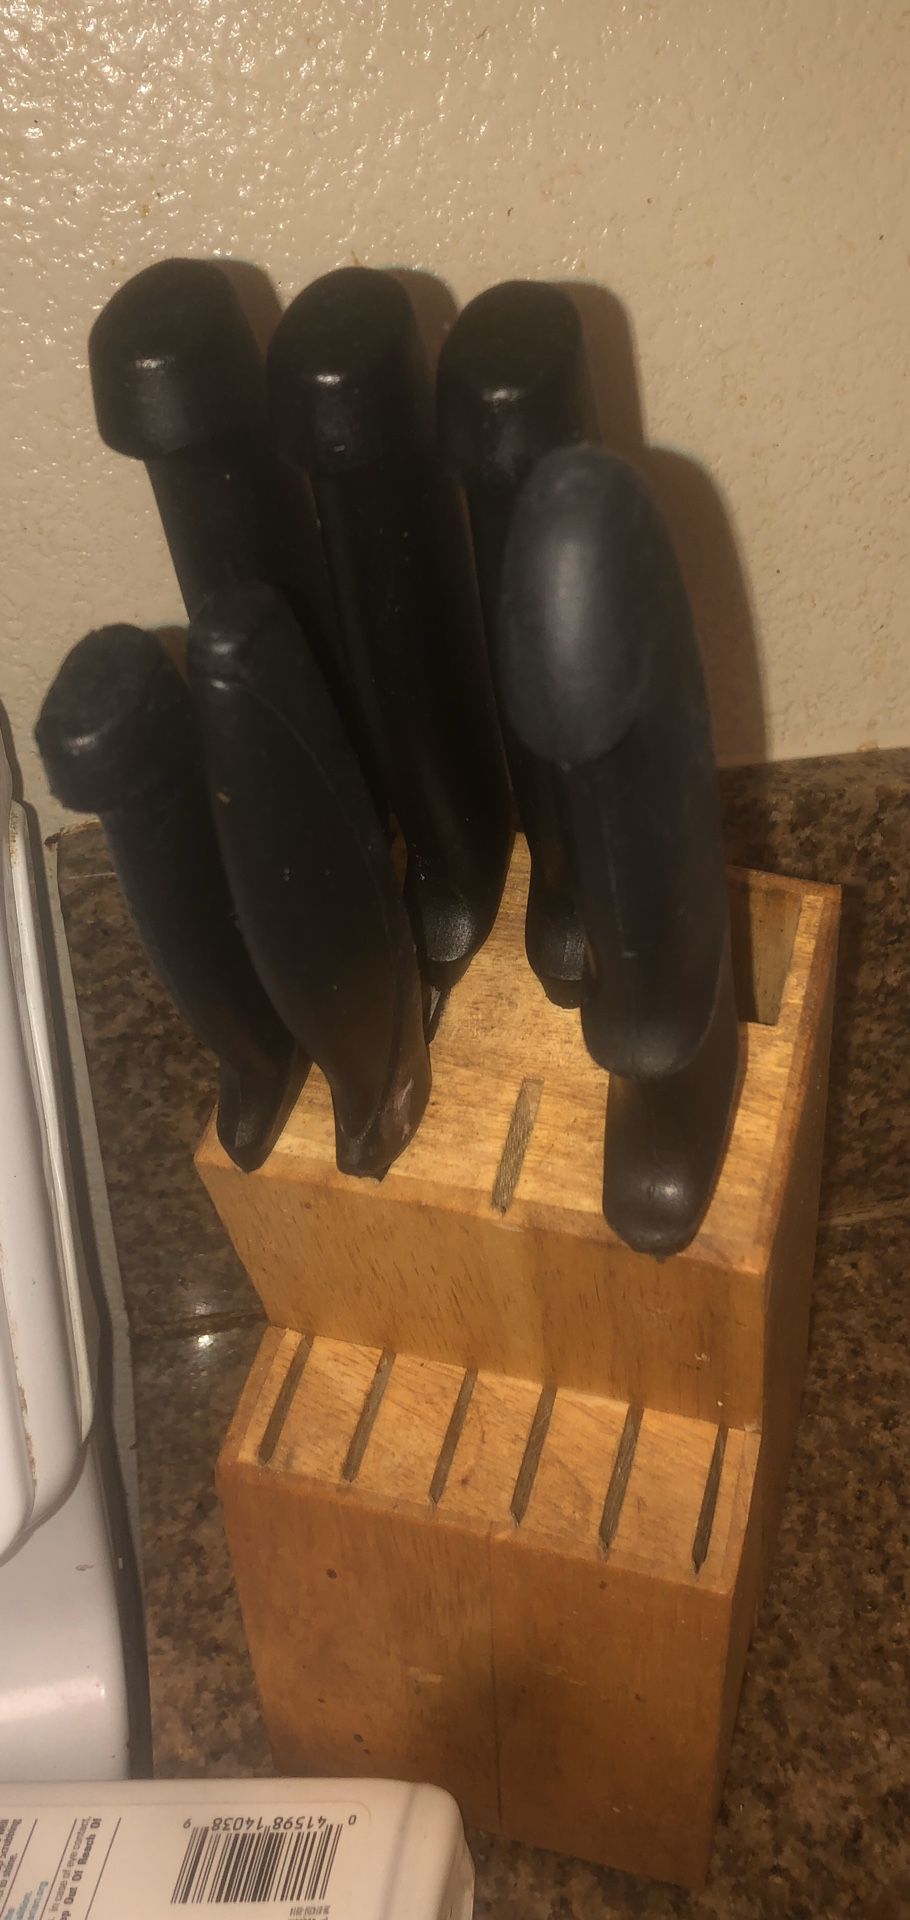 Knives and knife stand